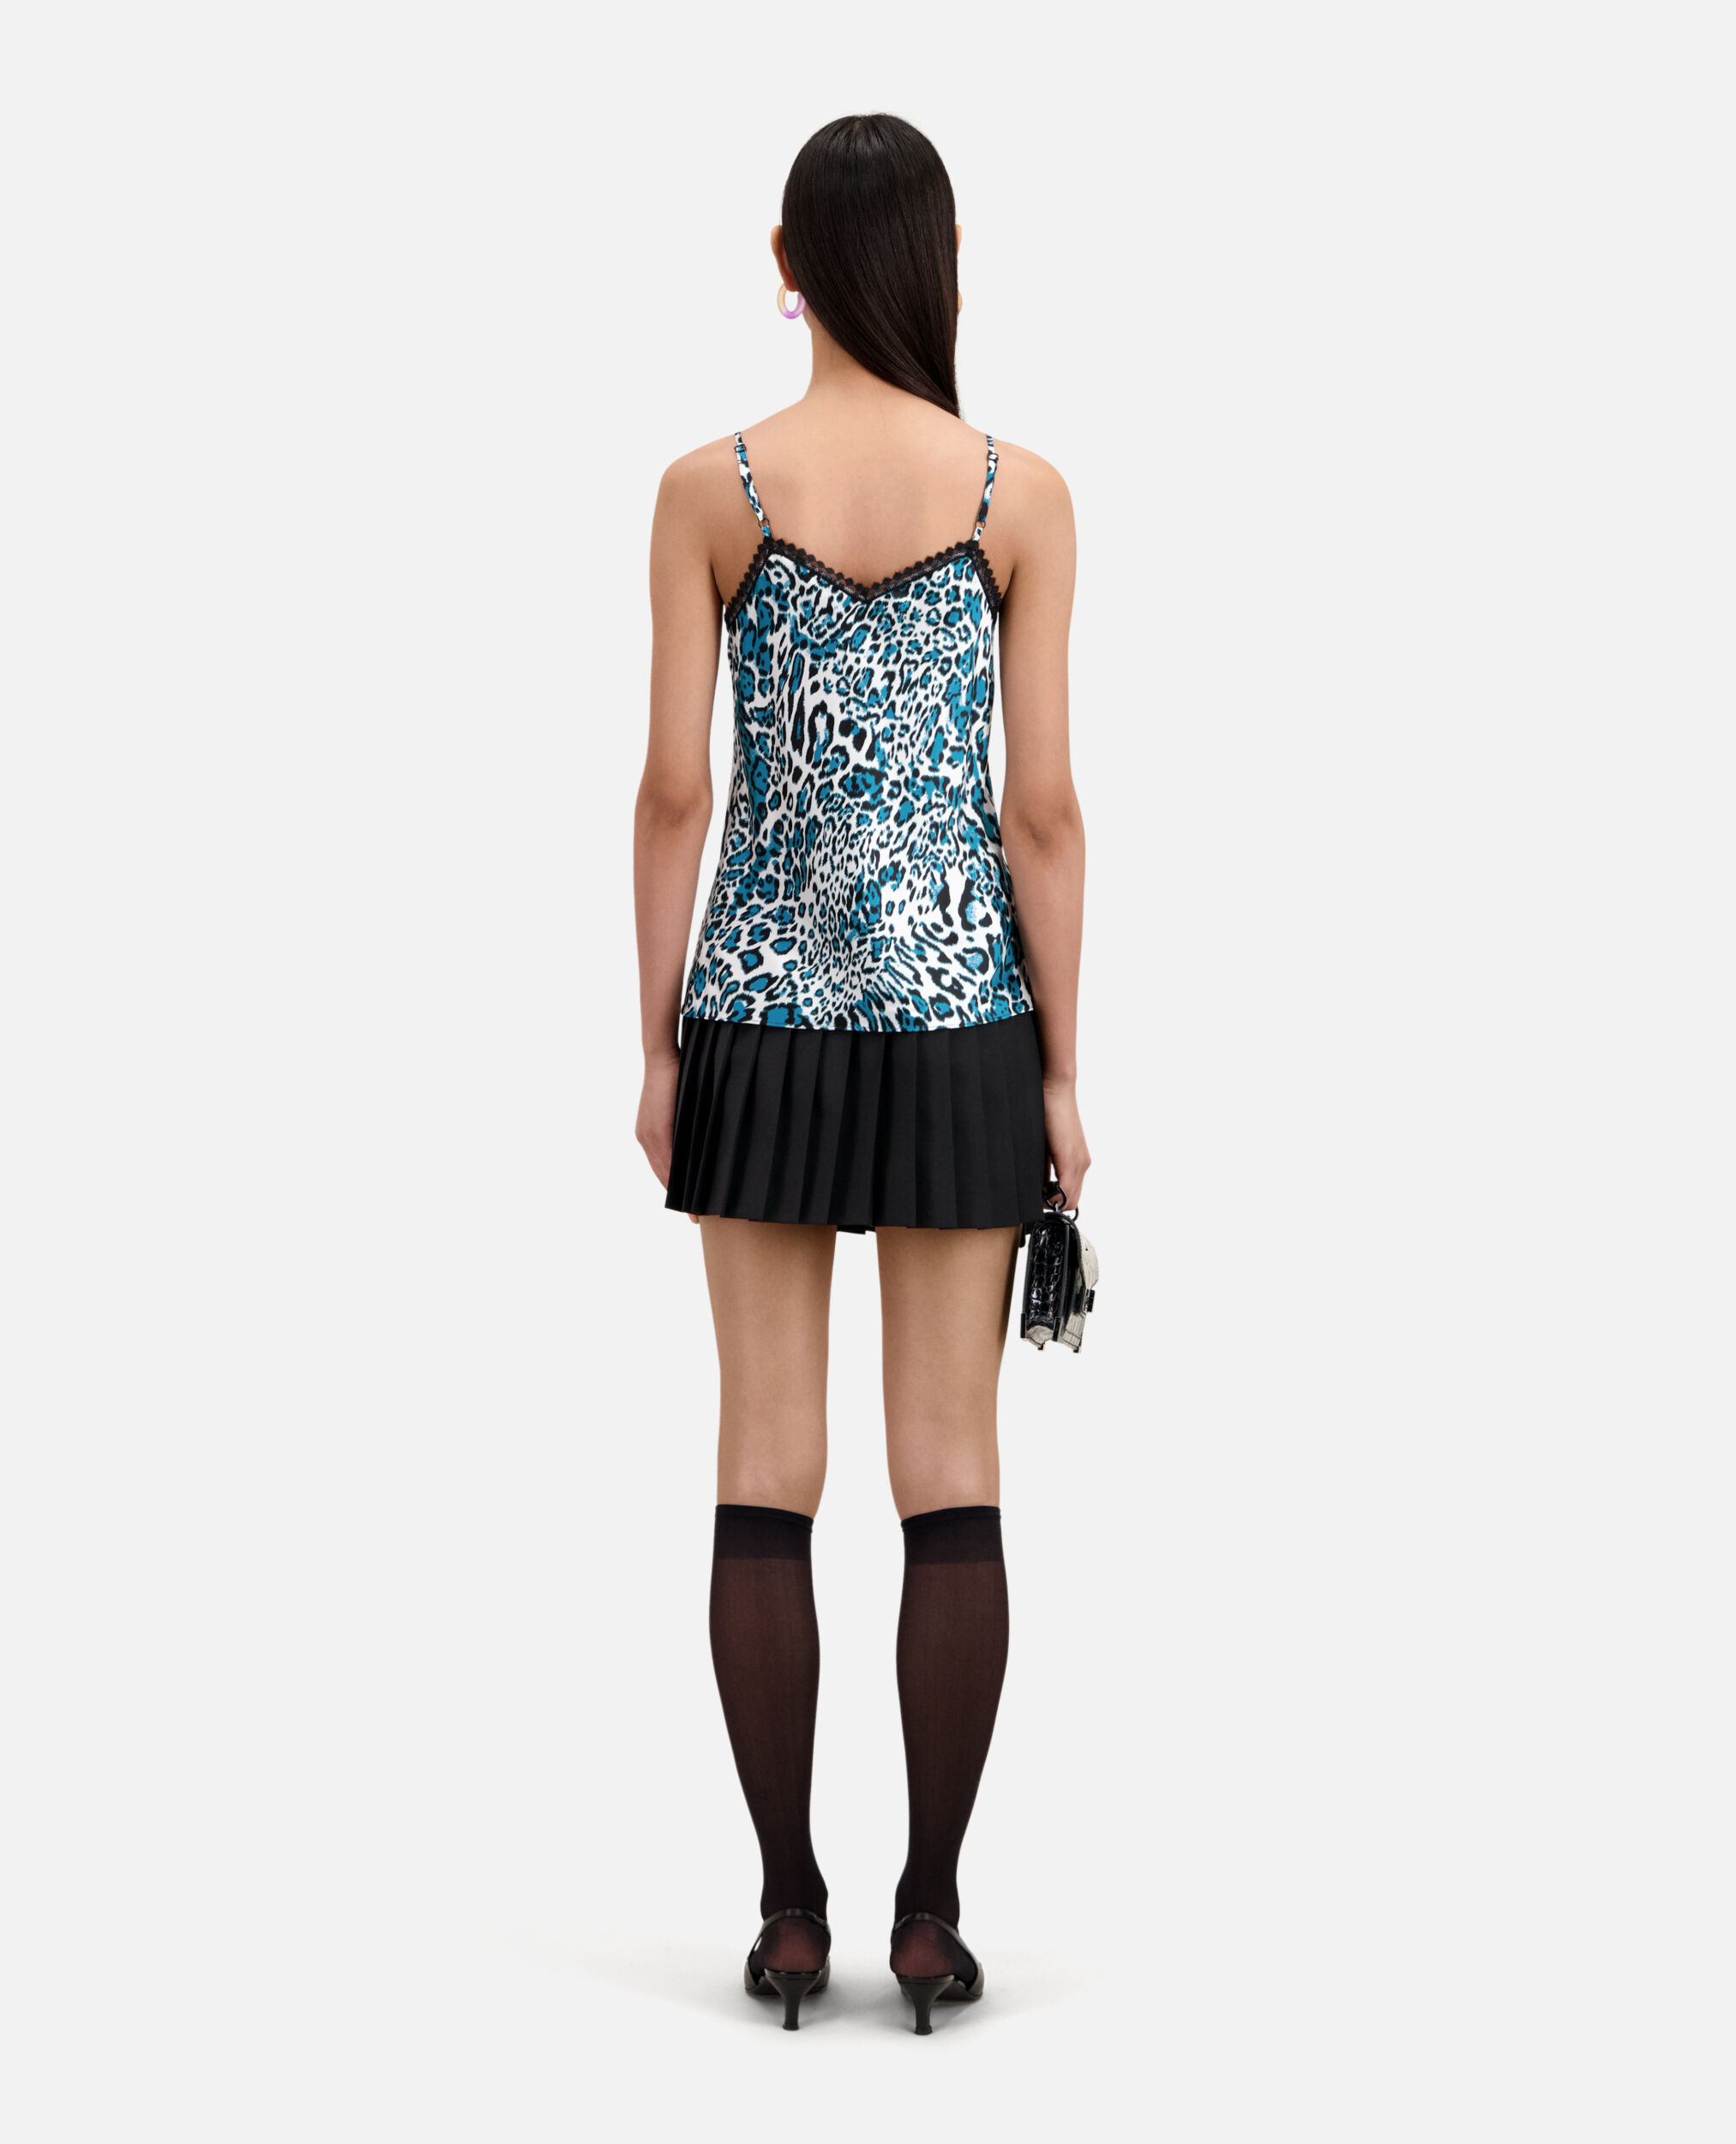 Printed silk camisole with lace details, BLUE WHITE, hi-res image number null